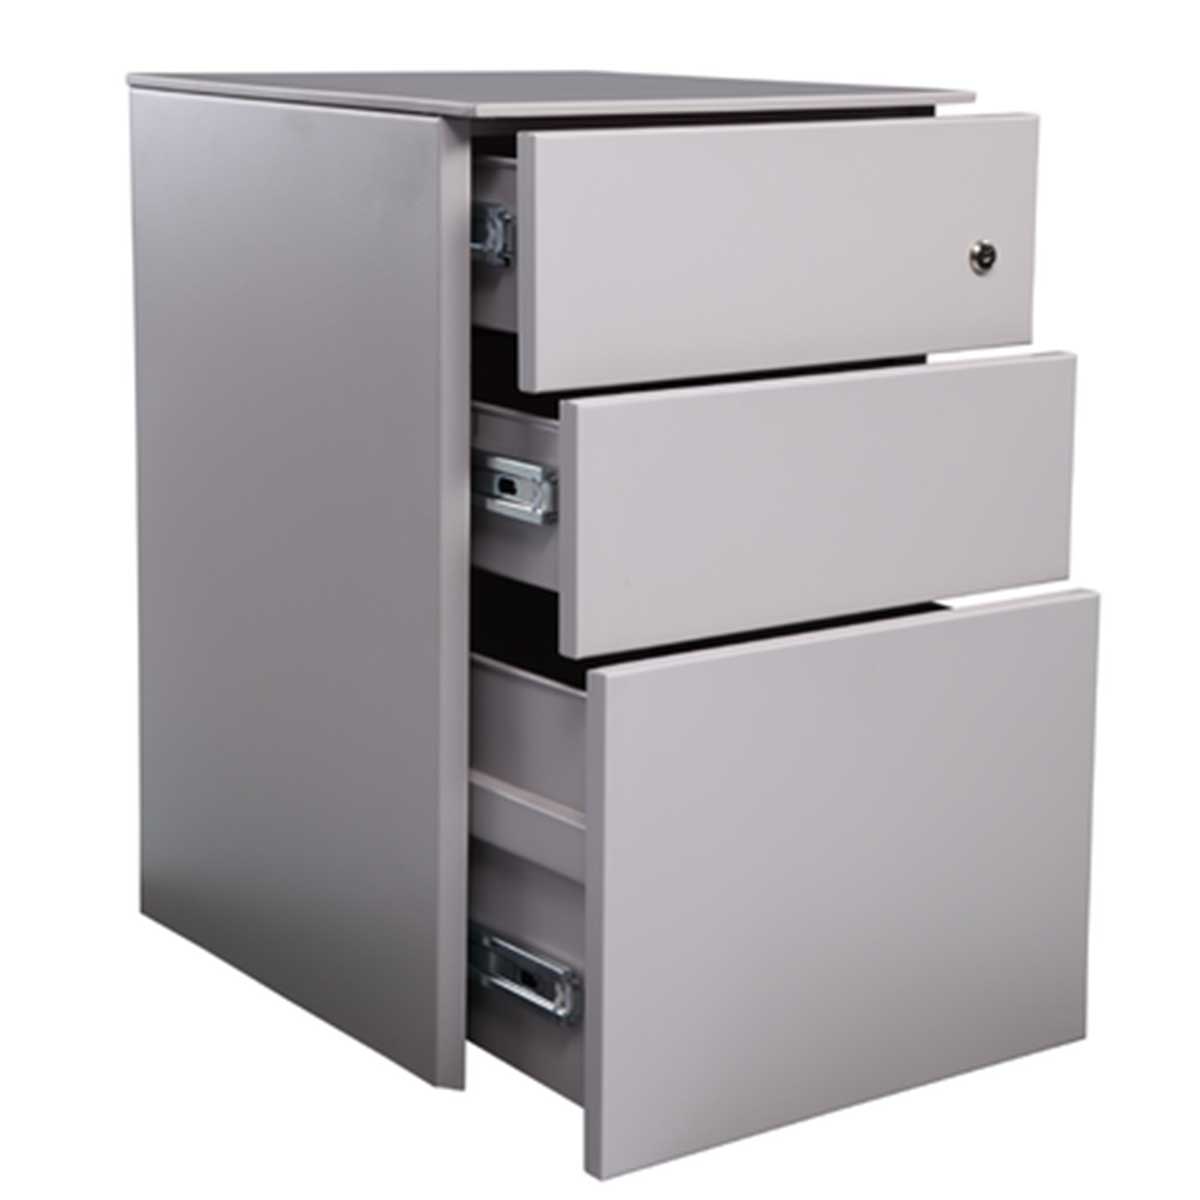 Pedestal Drawer Manufacturers, Suppliers in Faridabad Sector 16a